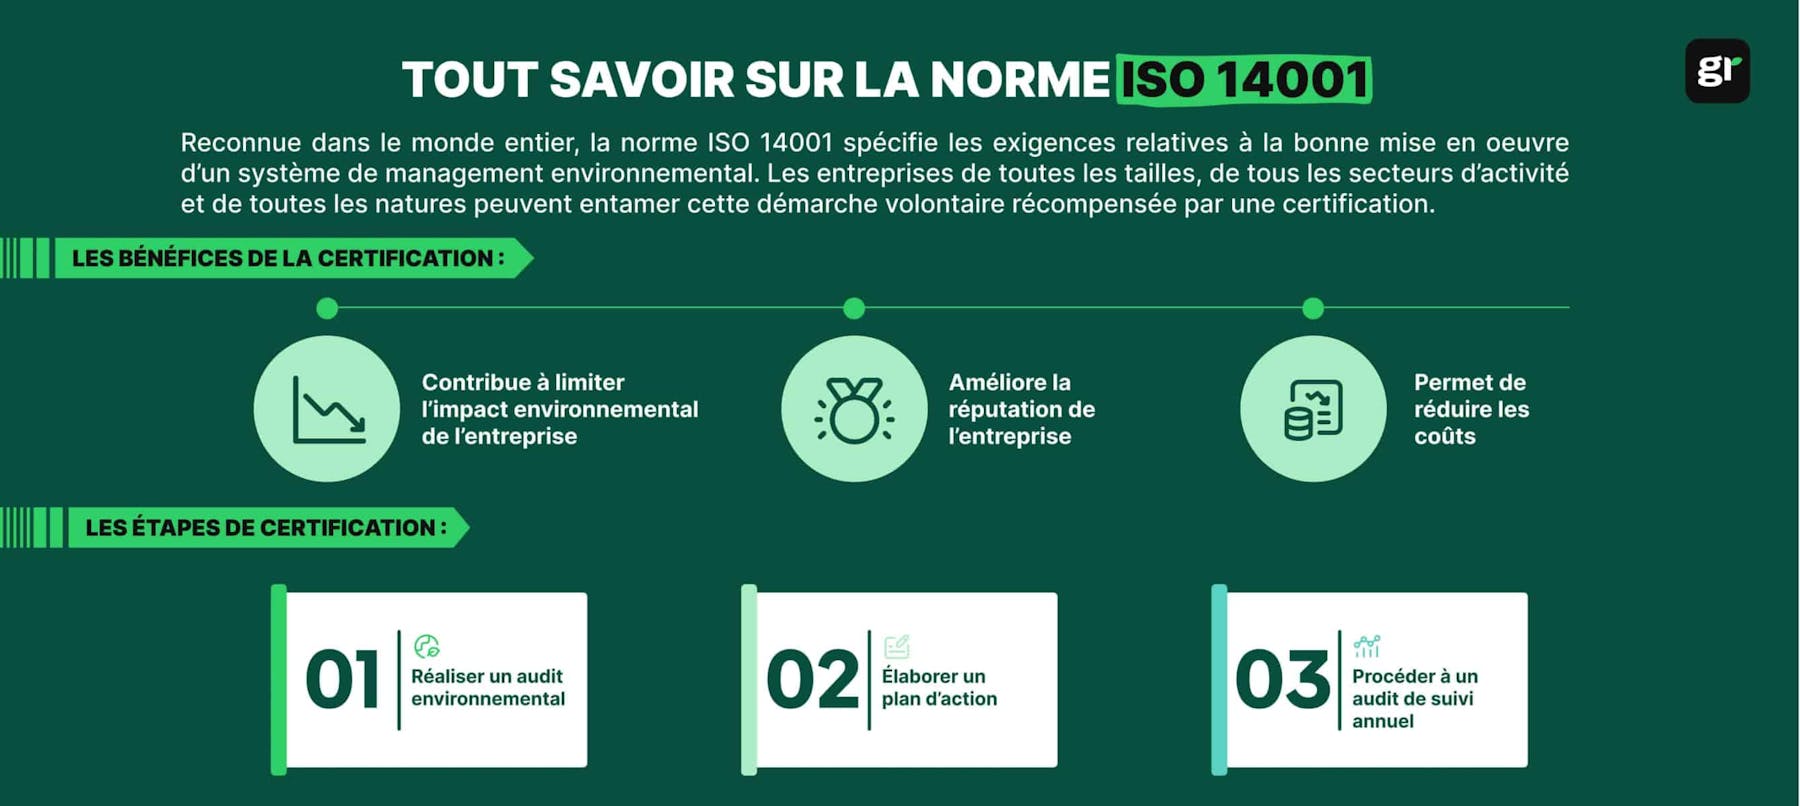 infographie iso 14001